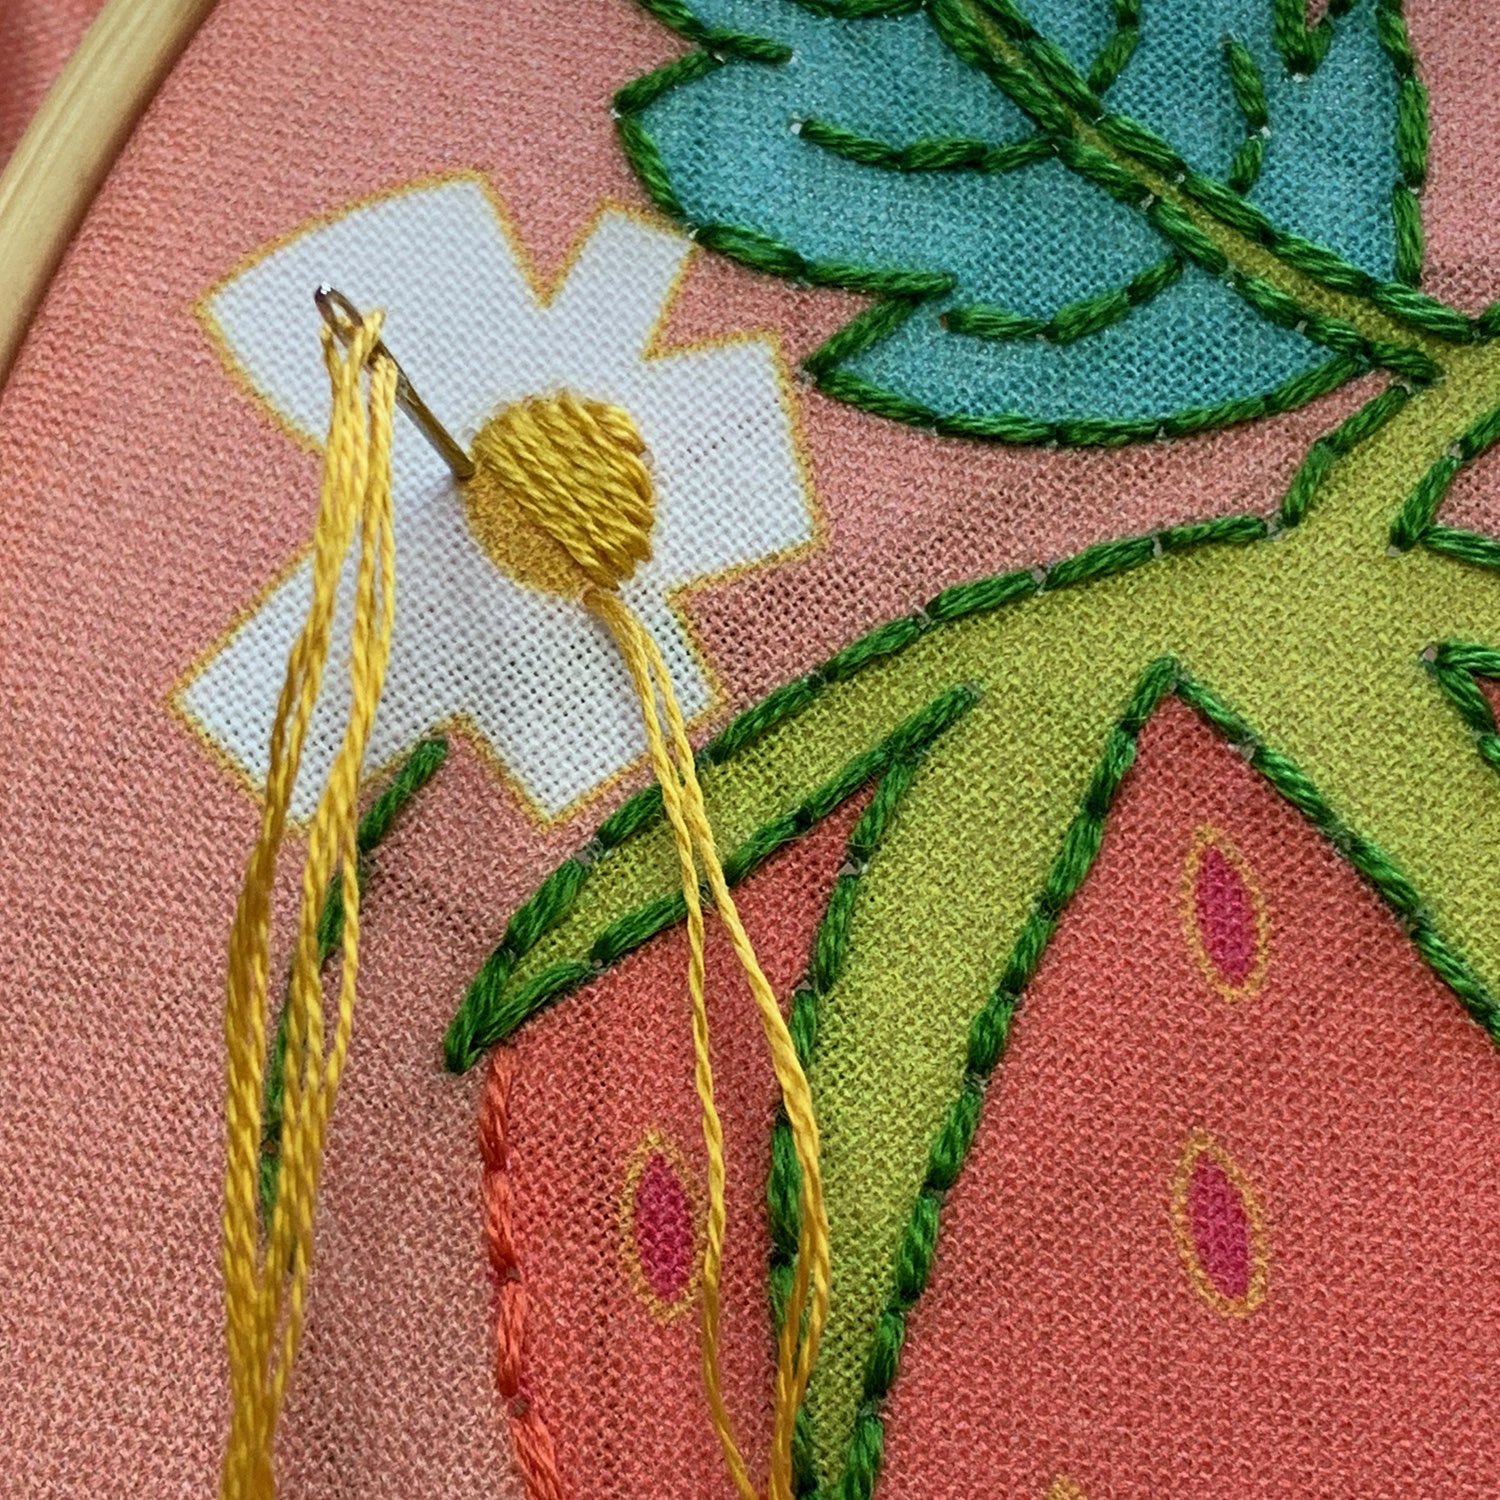 Strawberry embroidery detail 5.jpg